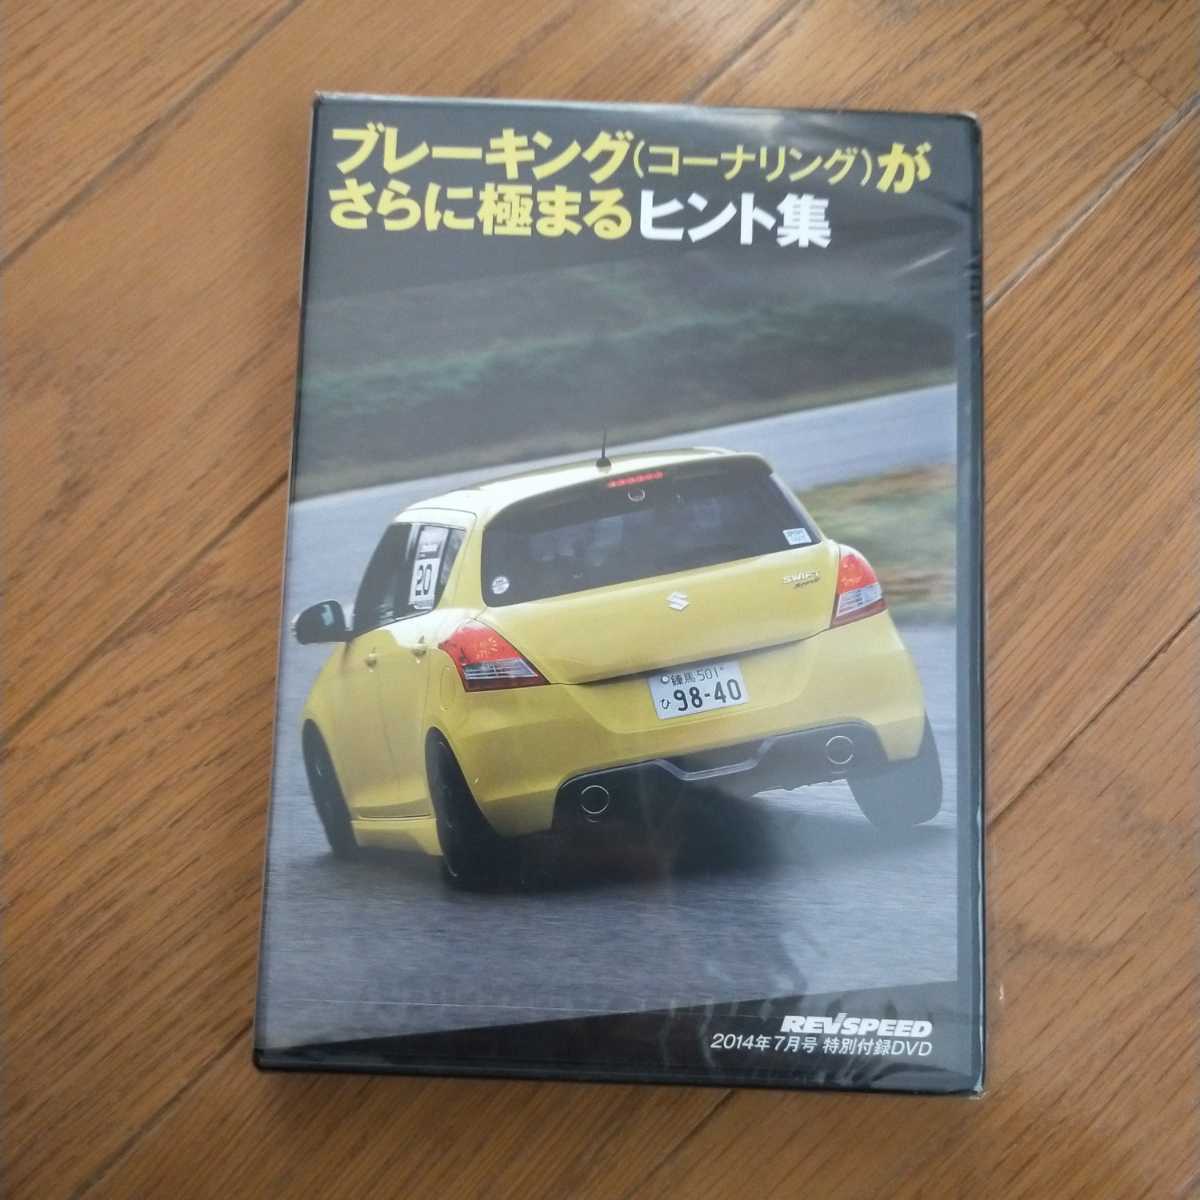 REVSPEED SPECIAL DVD　2014年7月号特別付録　63号　新品　未使用　レア品　廃盤品　ブレーキング　タカスサーキット　中山サーキット